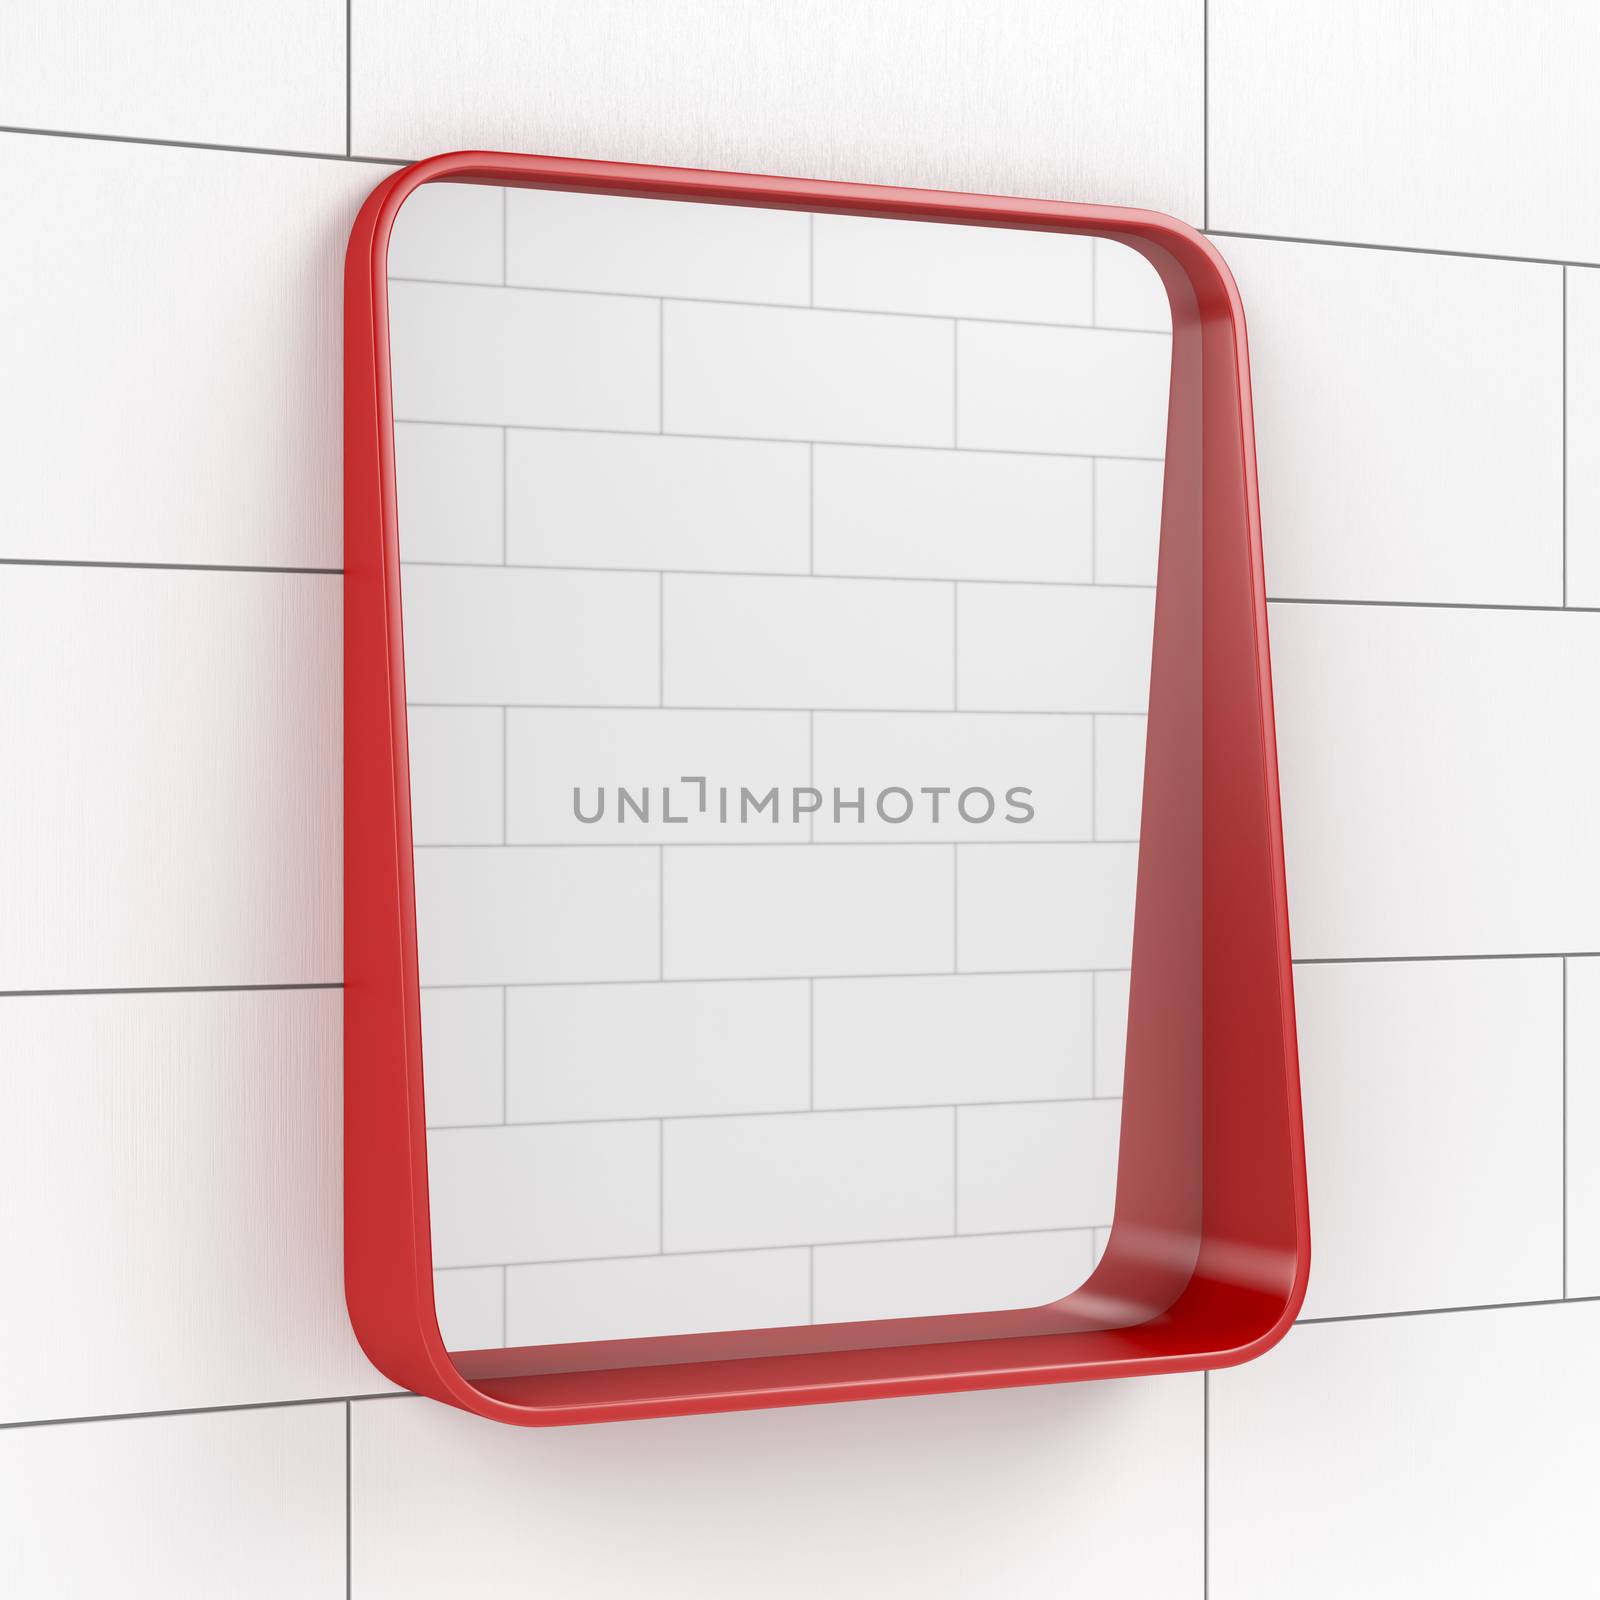 Mirror in the bathroom on tiled wall by magraphics